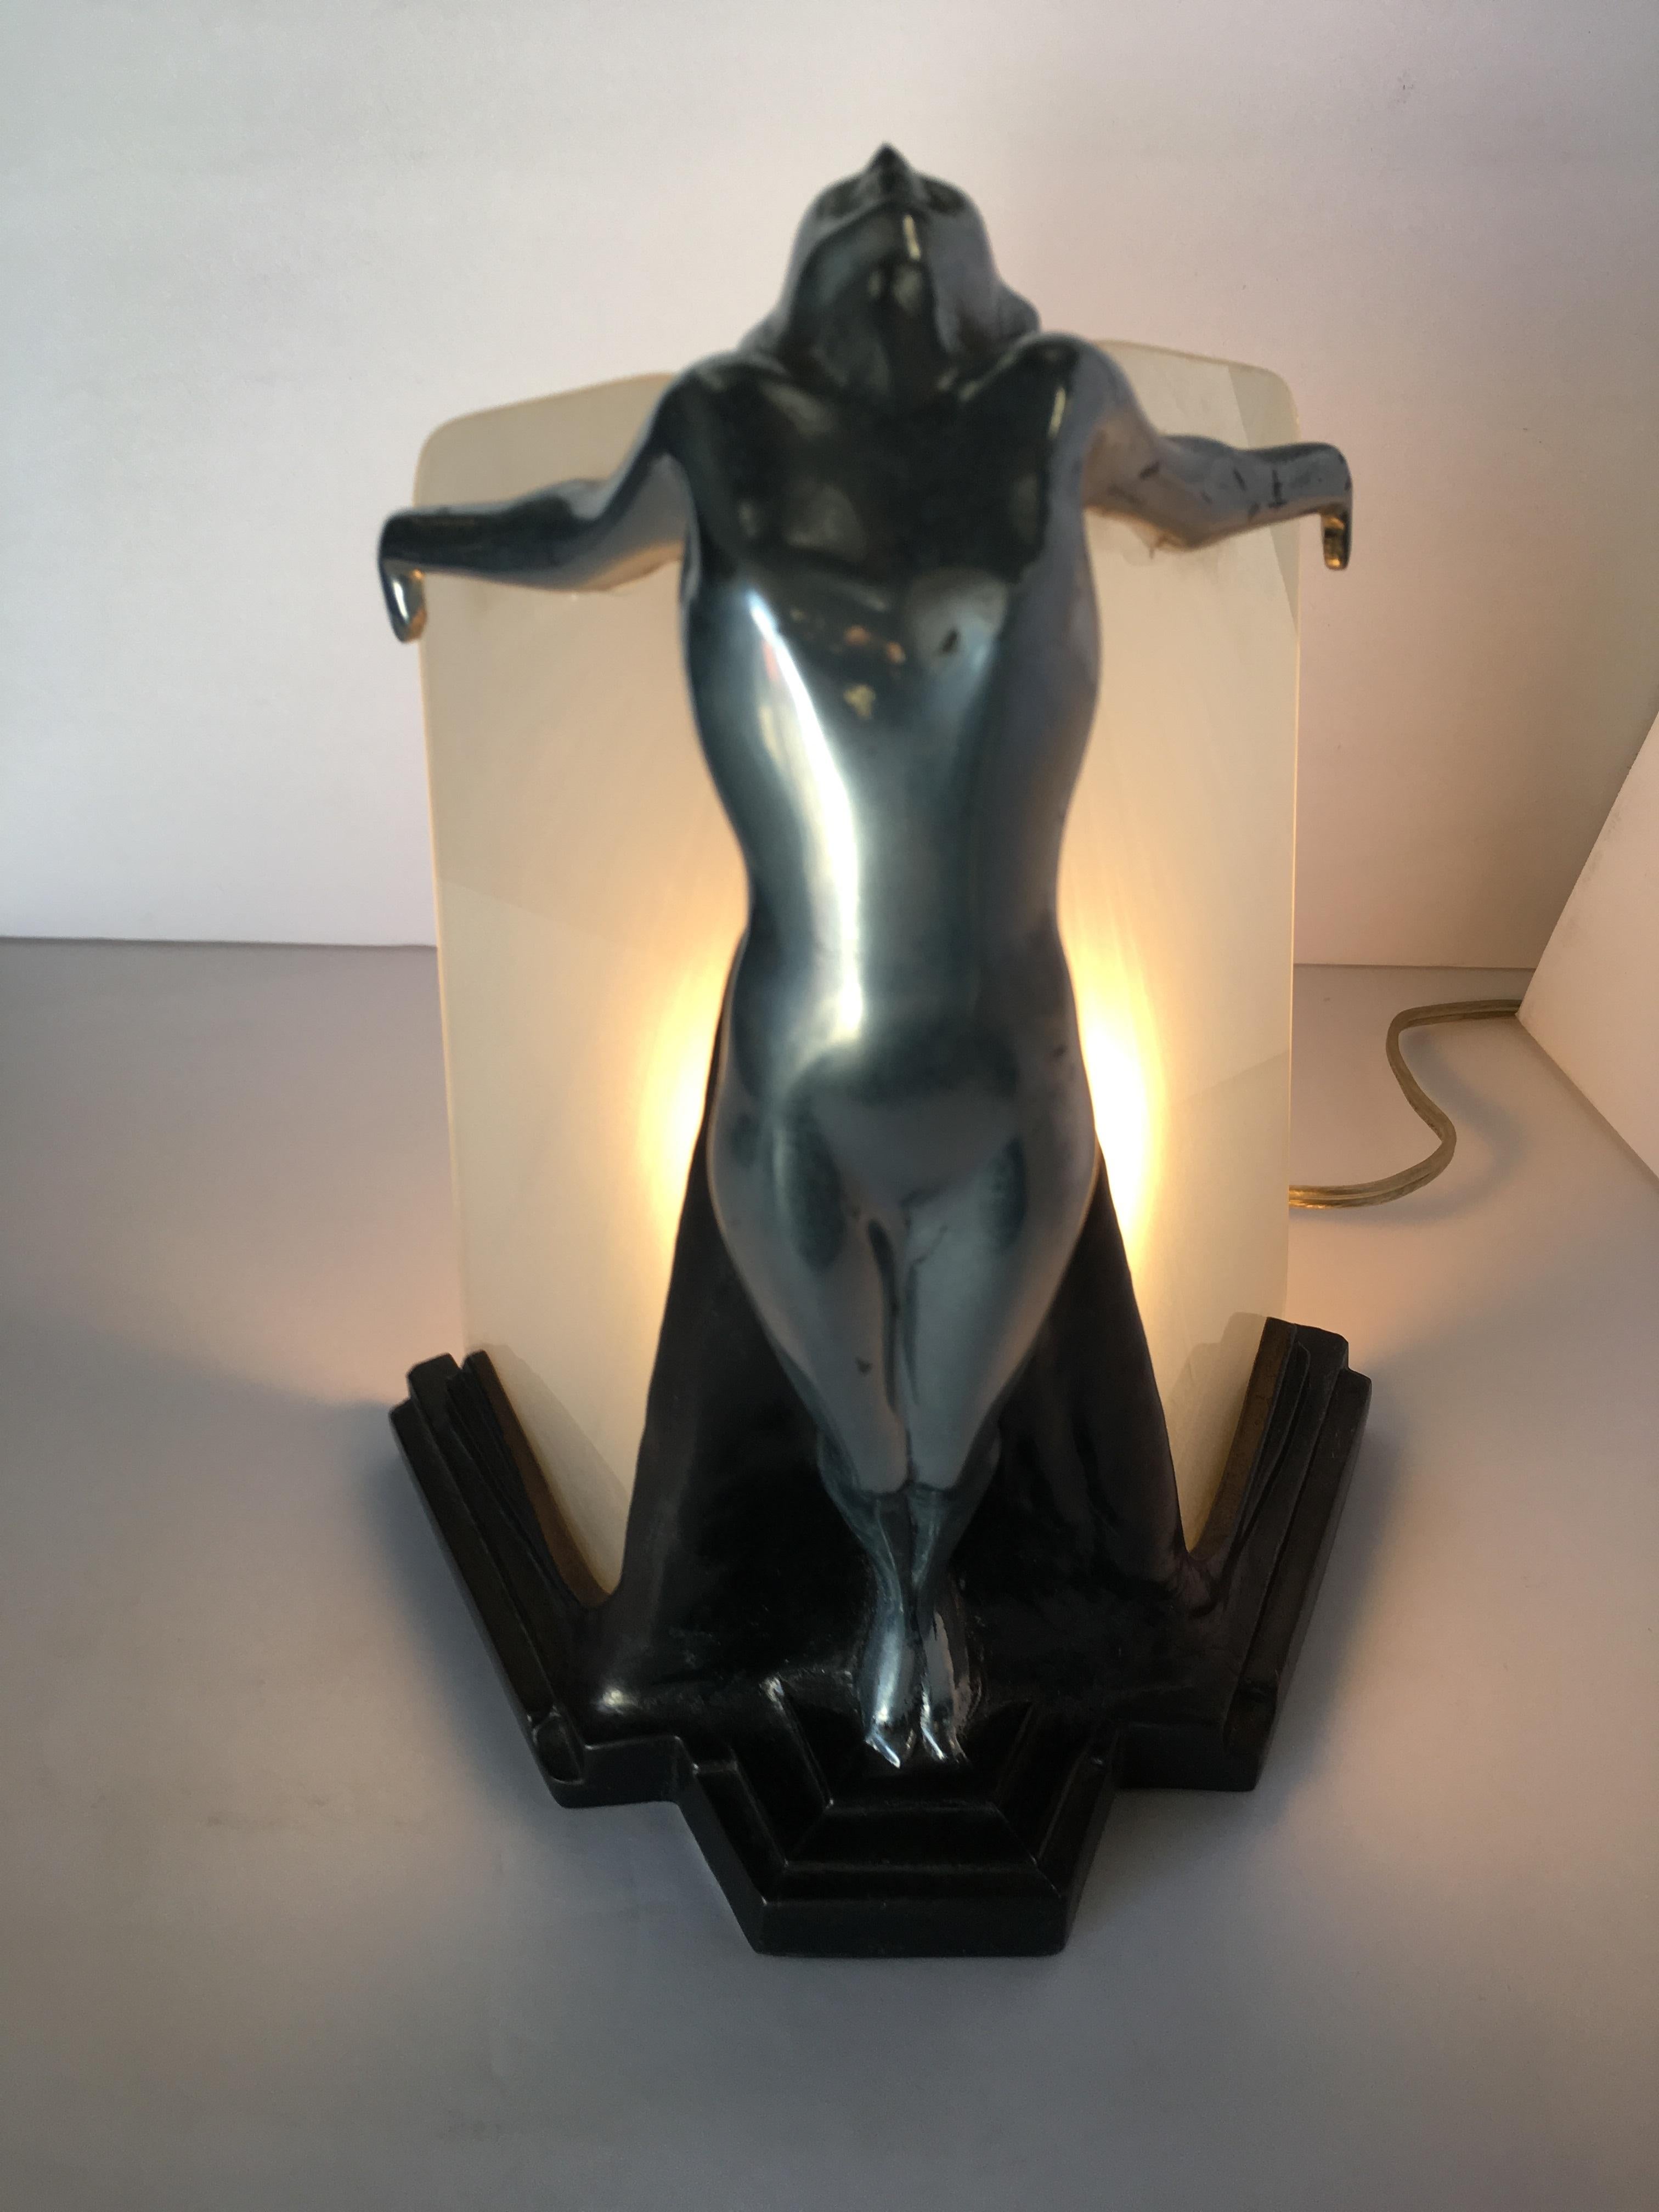 Chrome Frankart style table lamp featuring a nude female outstretched woman holding two glass plate lamp shades giving an almost wing-like appearance. Available 2, circa 1980, by Sarsaparilla.